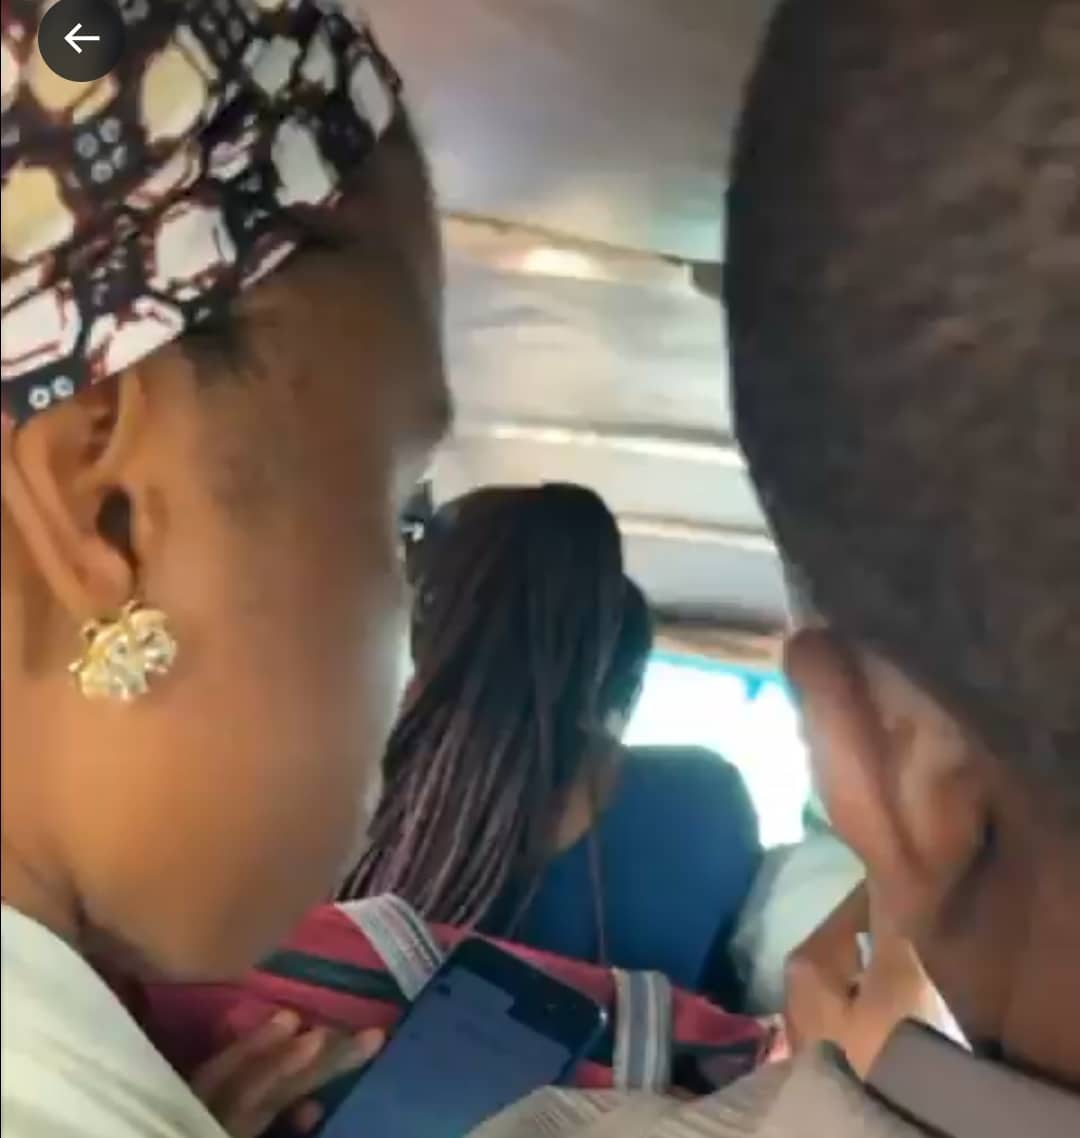 "Couple goals" - Nigerian husband, wife generate buzz as they play SportyBet together on their phones inside a bus